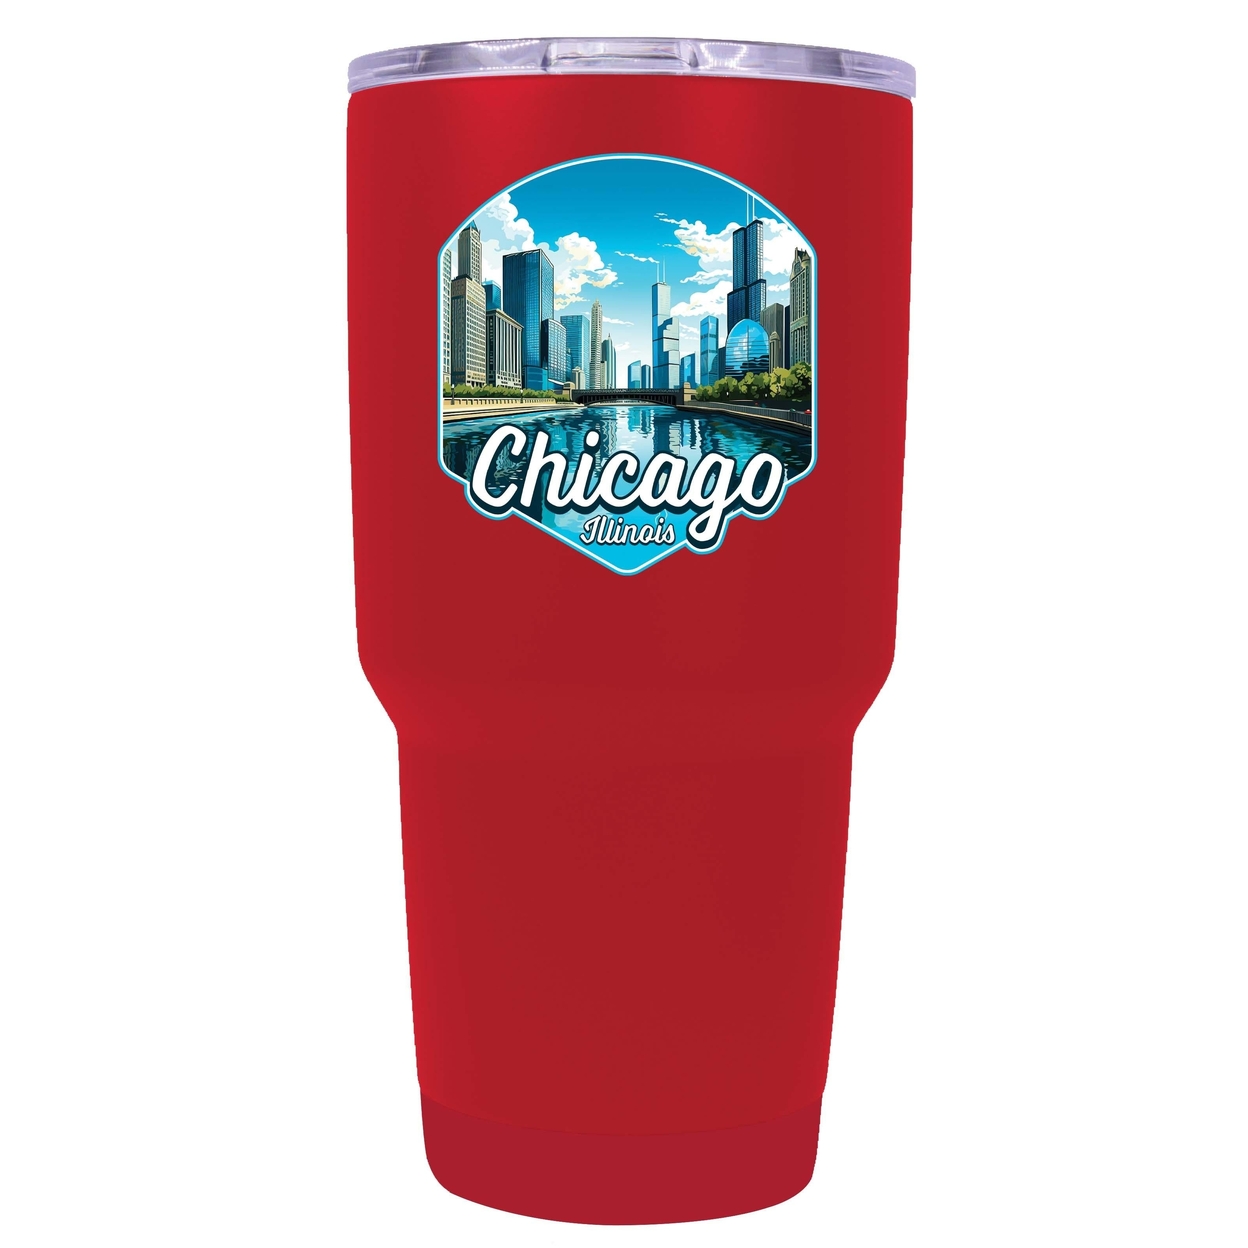 Chicago Illinois A Souvenir 24 Oz Insulated Tumbler - Red,,4-Pack